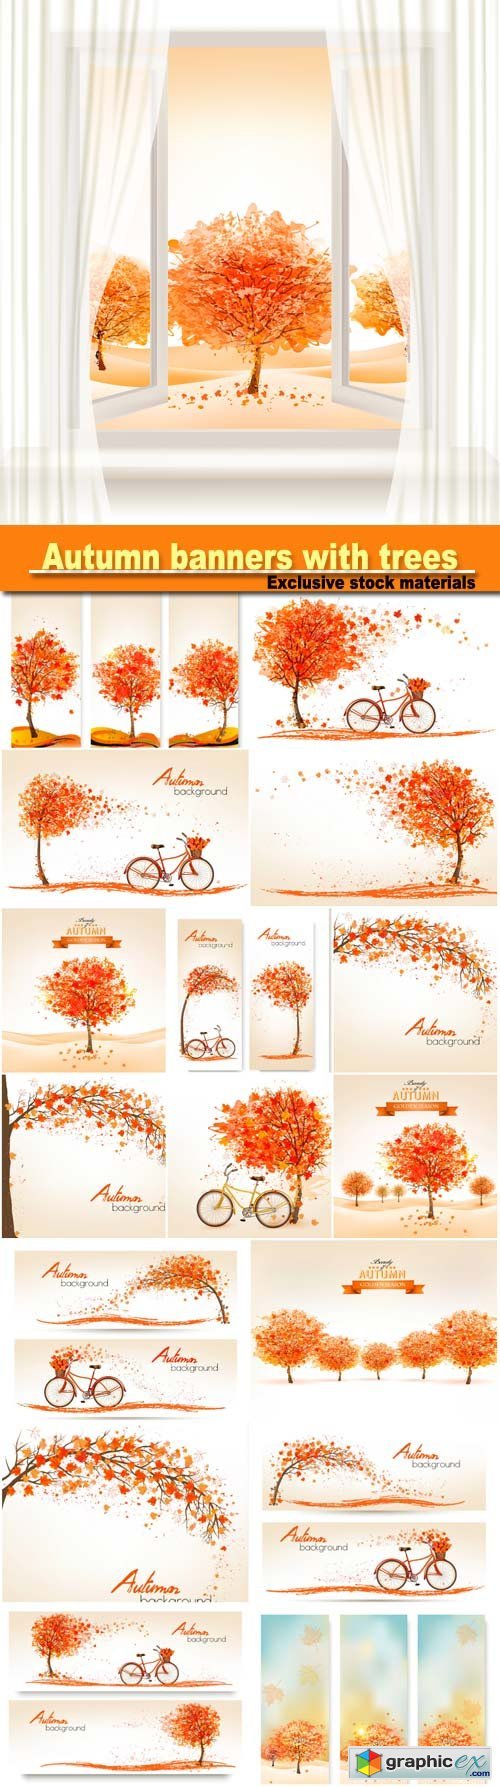 Autumn banners with trees and a bicycle